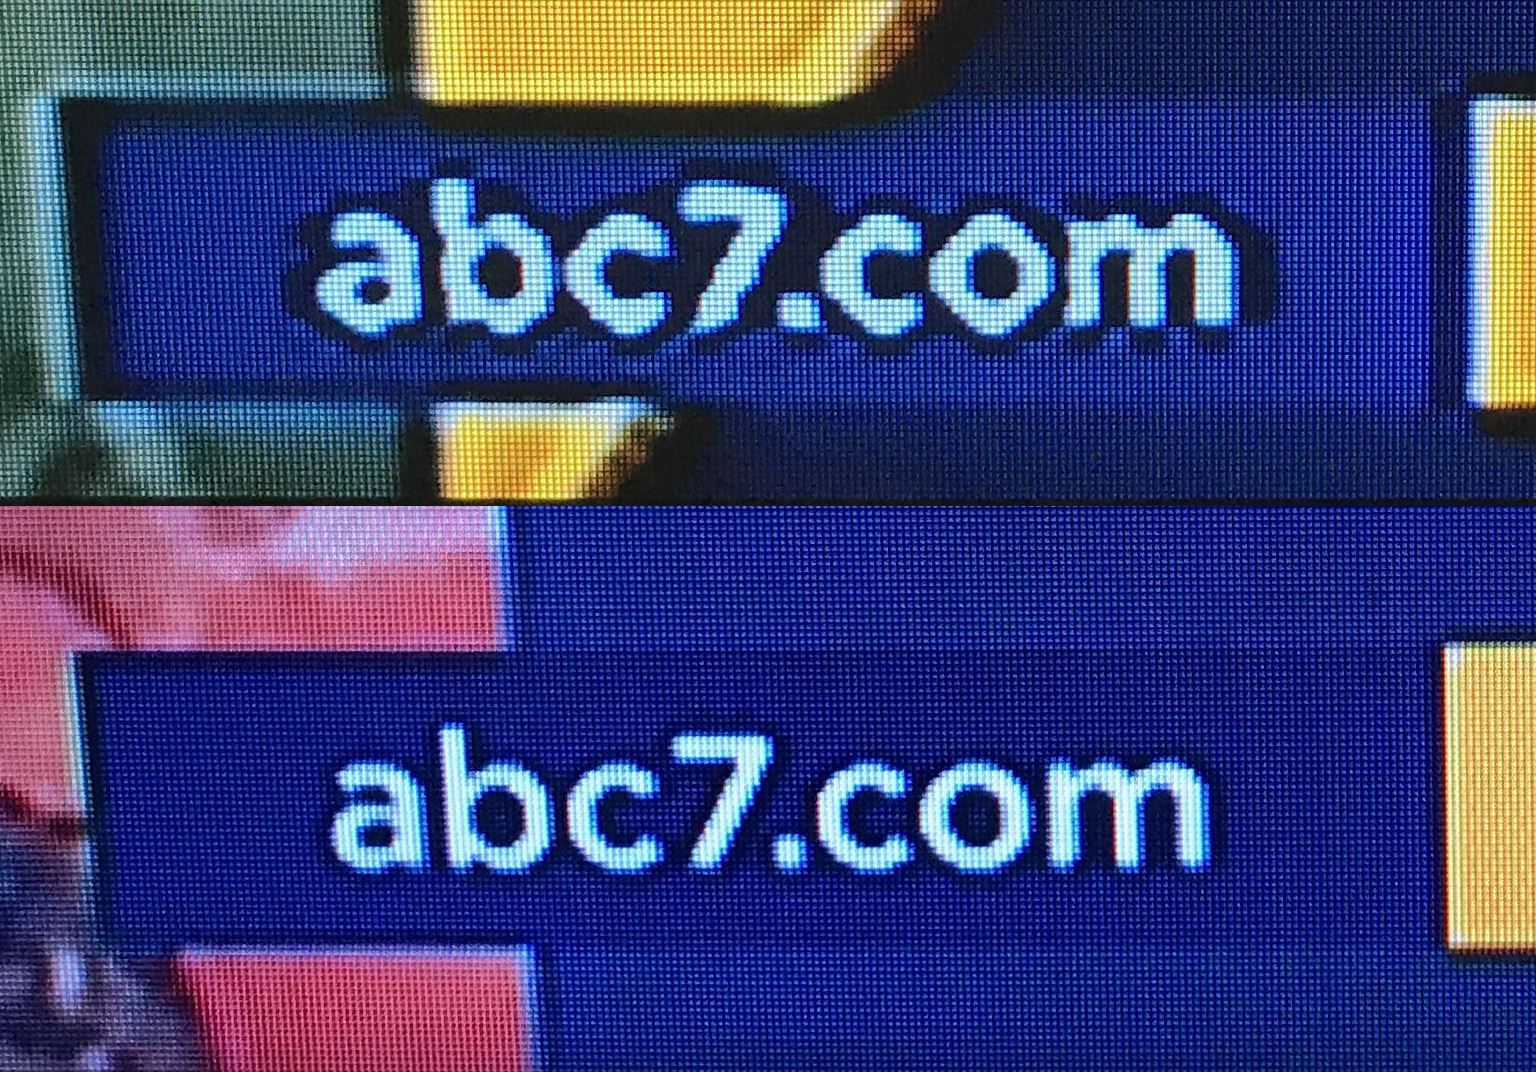 abc7.com text with satellite dish image on top, broadcast TV image on bottom